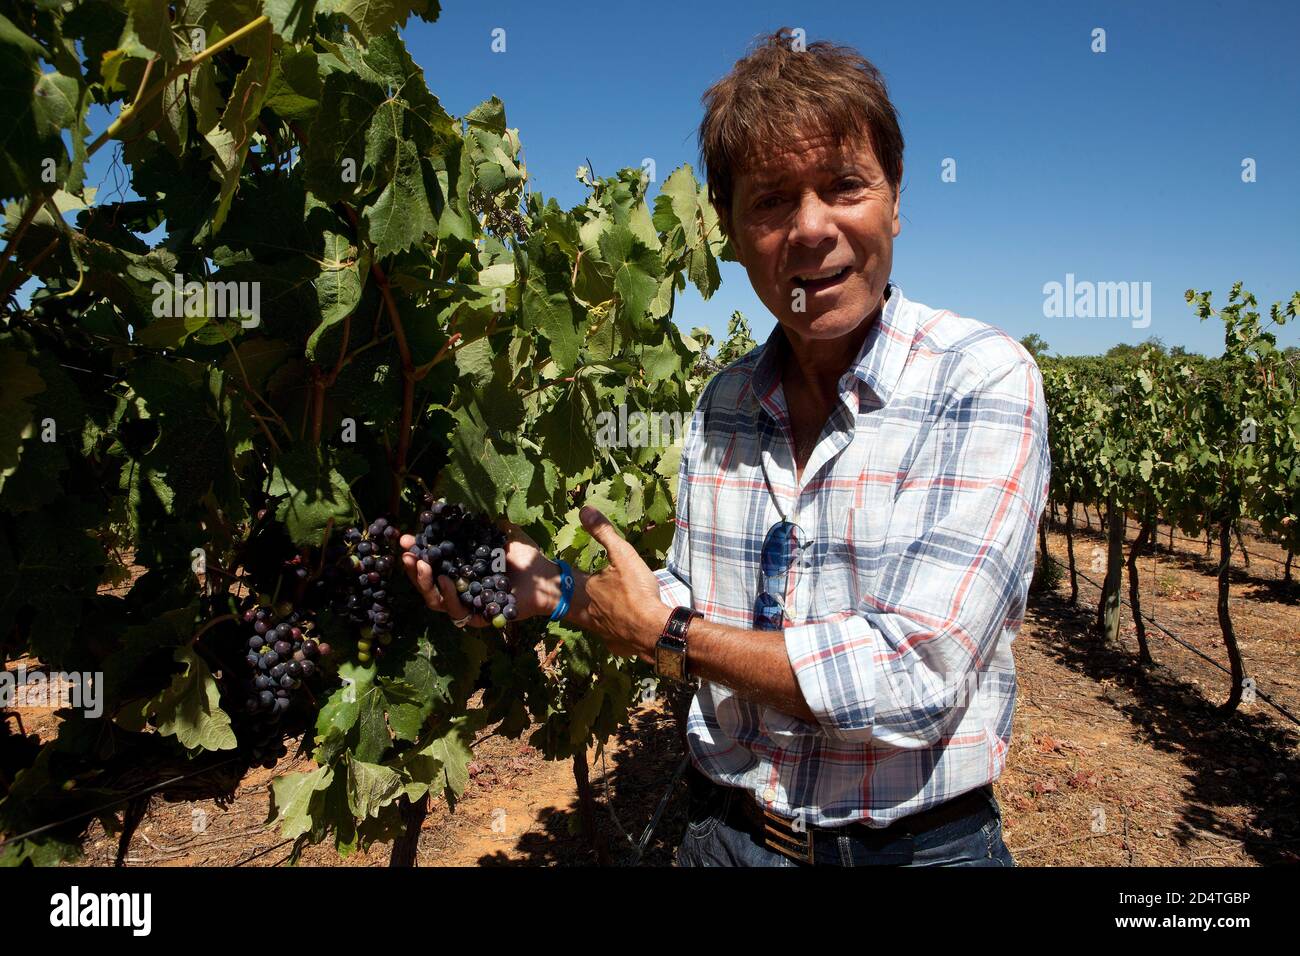 Cliff Richard at his Adoga do Cantor winery in Albufeira,Algarve,Portugal Stock Photo